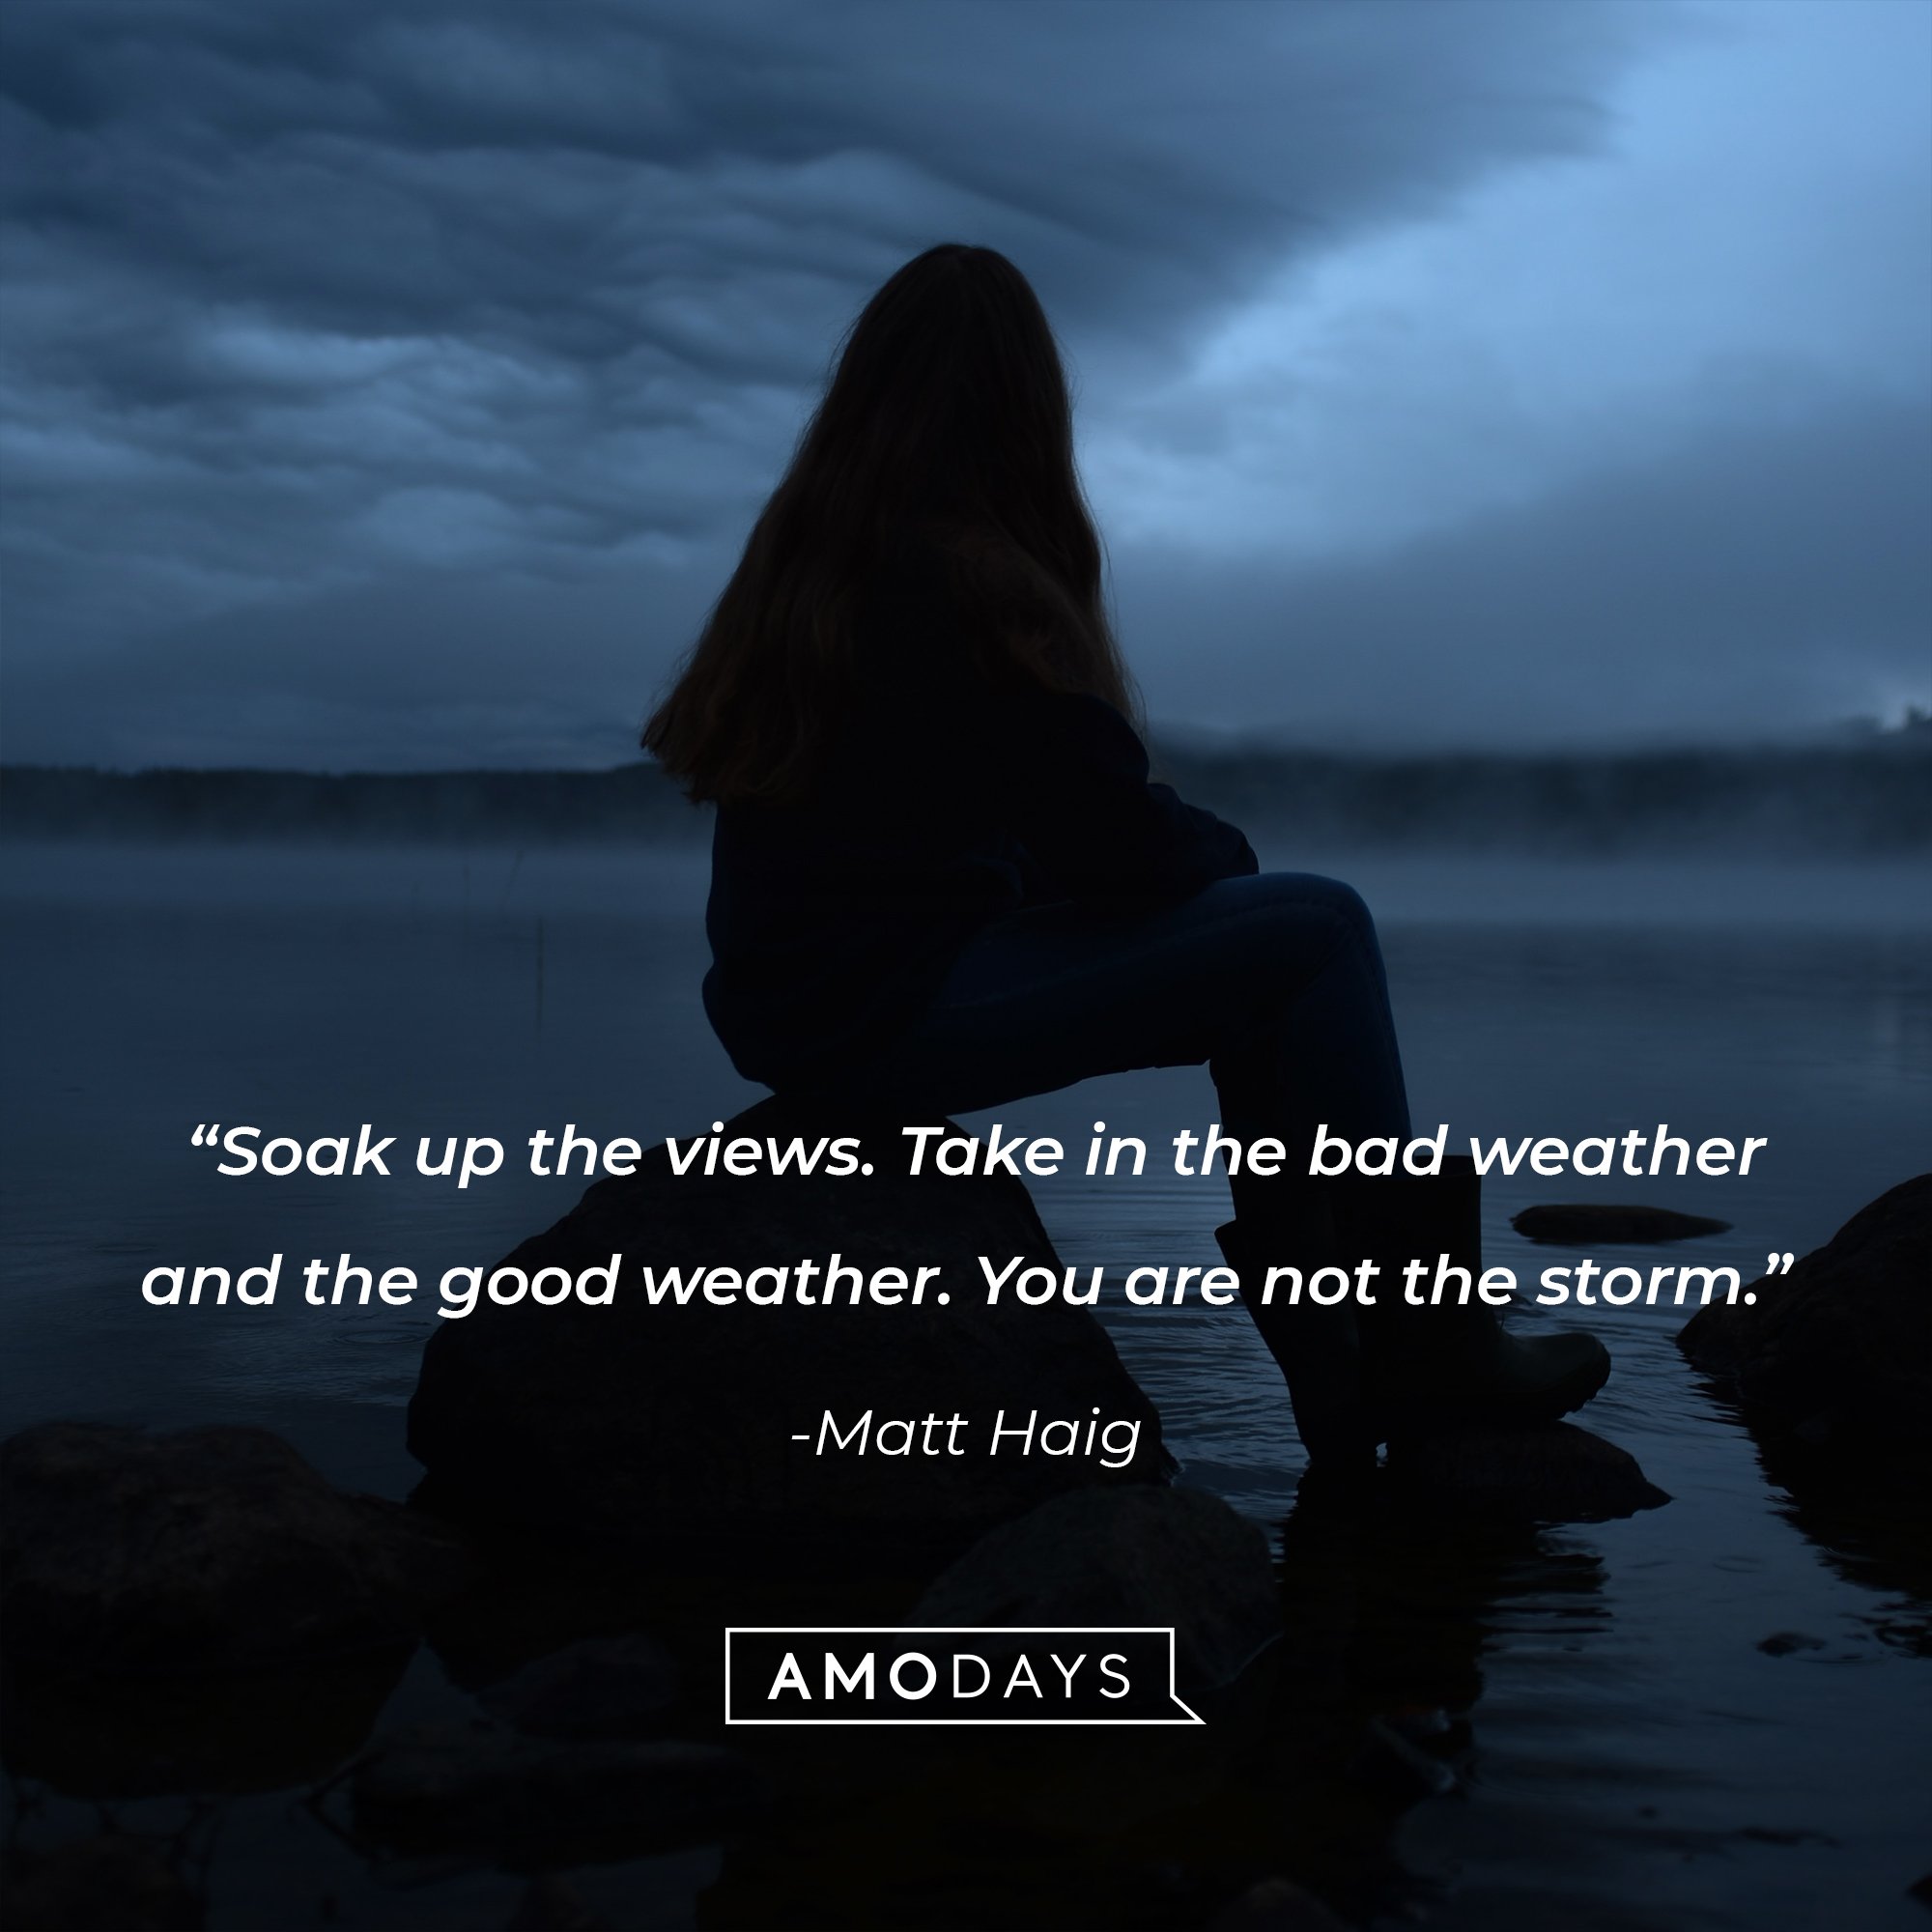   Matt Haig's quote: “Soak up the views. Take in the bad weather and the good weather. You are not the storm.” | Image: Amodays